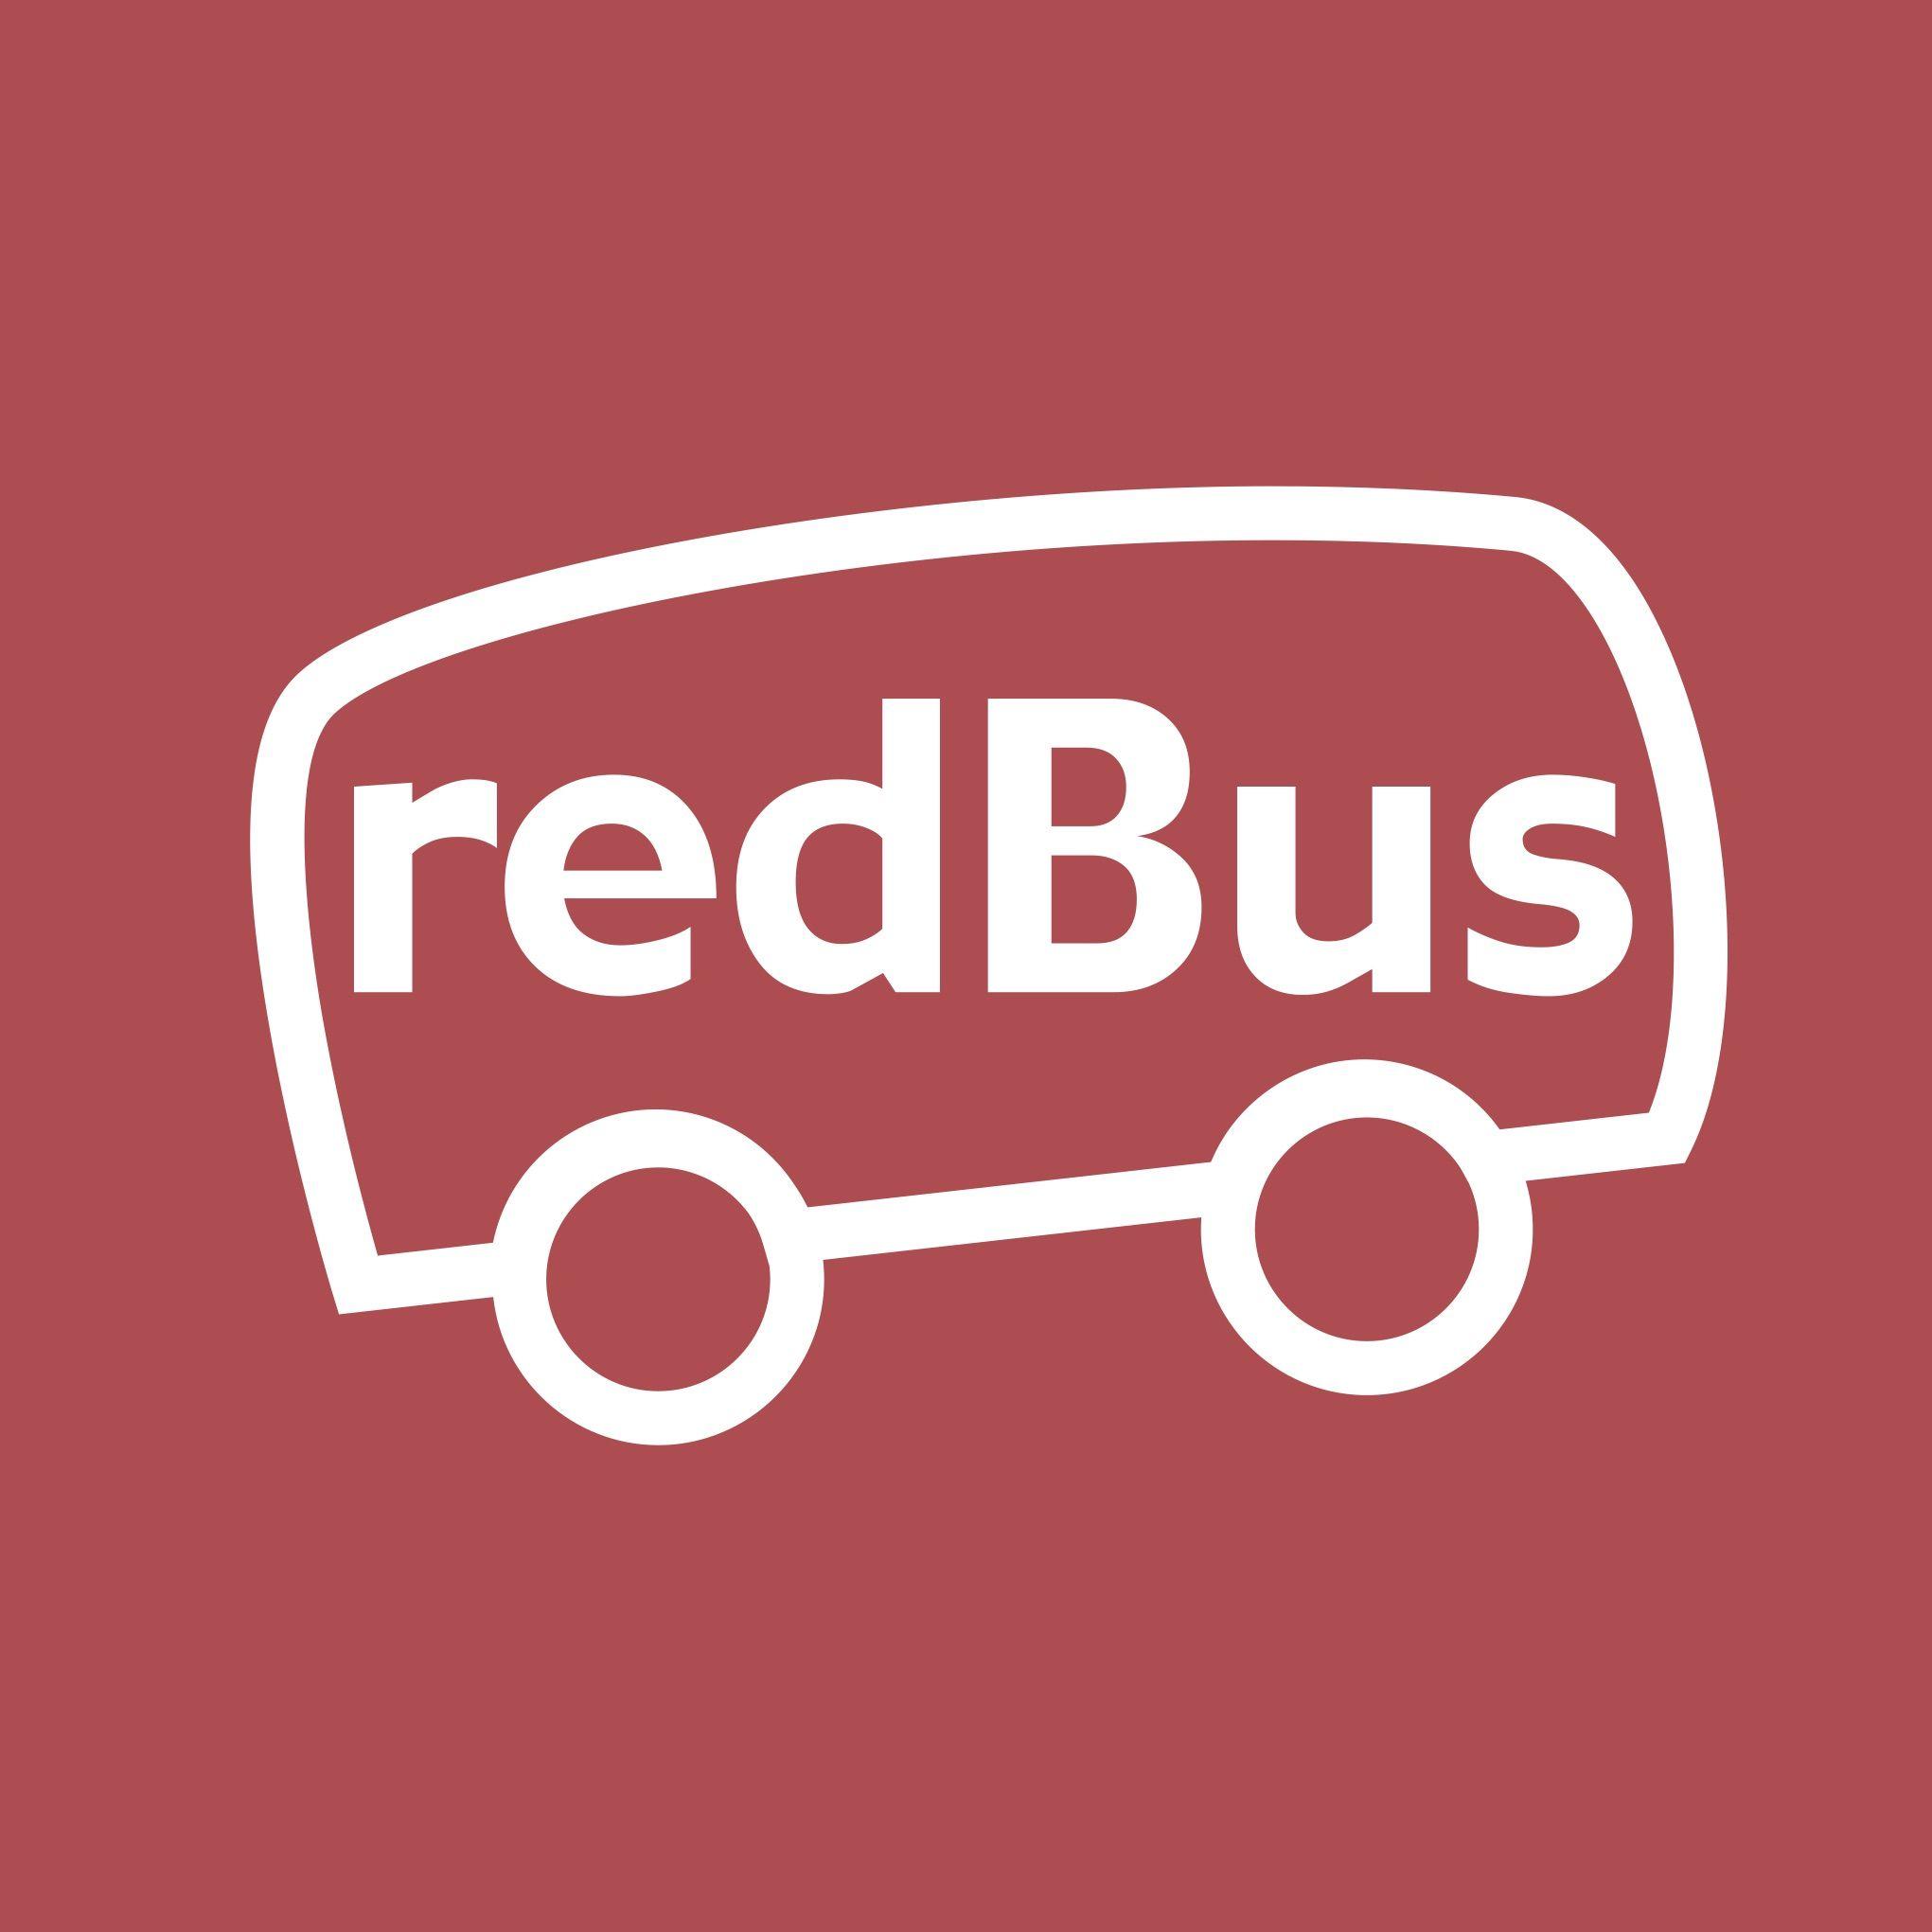 Red Bus Logo - redBus - Exclusive Offers on Visa Cards - India - Visa Offers